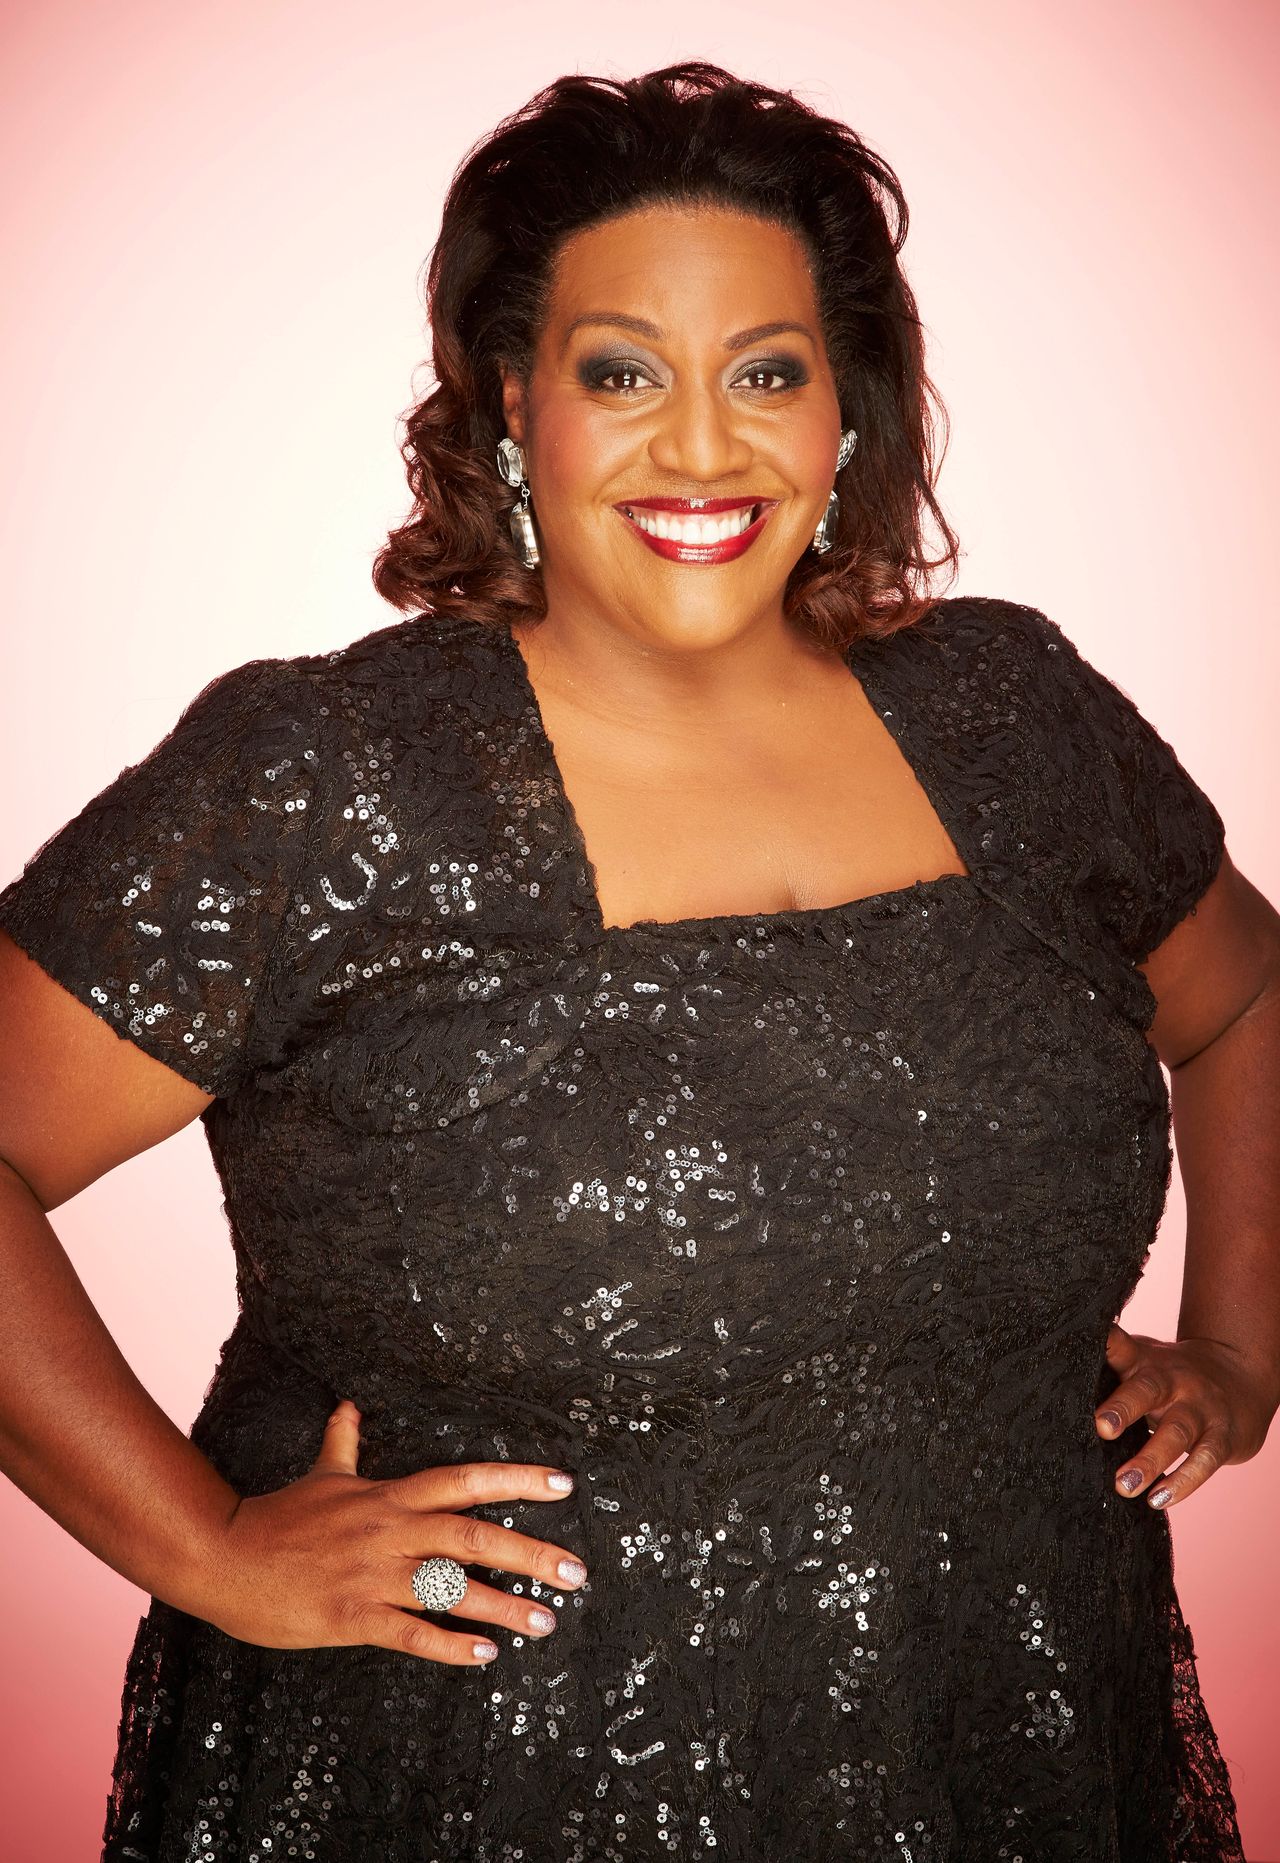 This Morning's Alison Hammond left Harrison Ford and Ryan Gosling